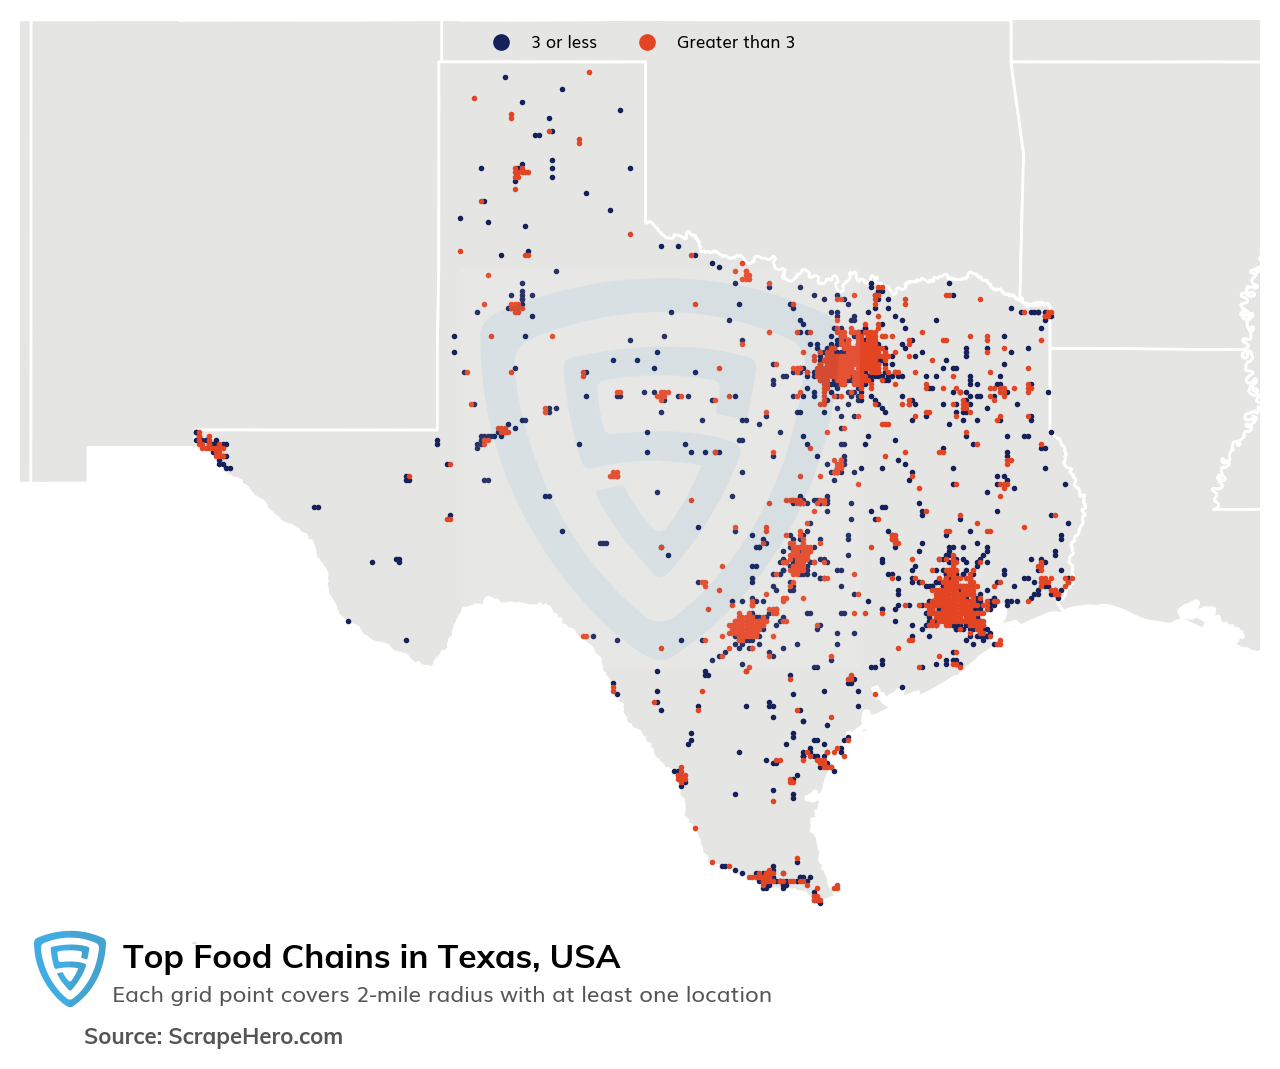 Map of 10 Largest Food Chains in Texas in 2021 Based on Locations